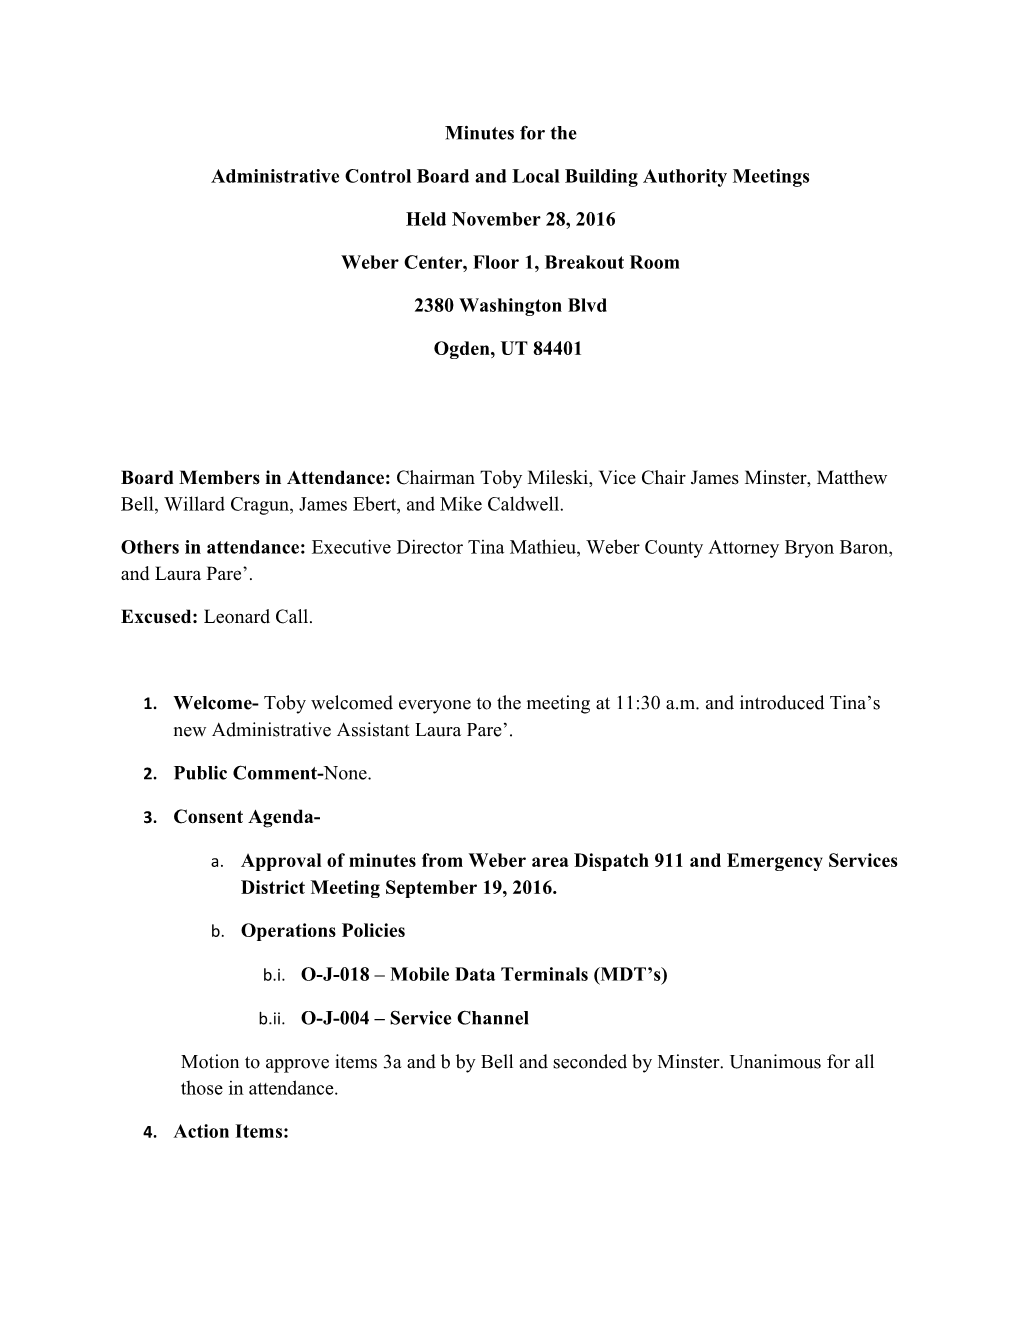 Administrative Control Board and Local Building Authority Meetings